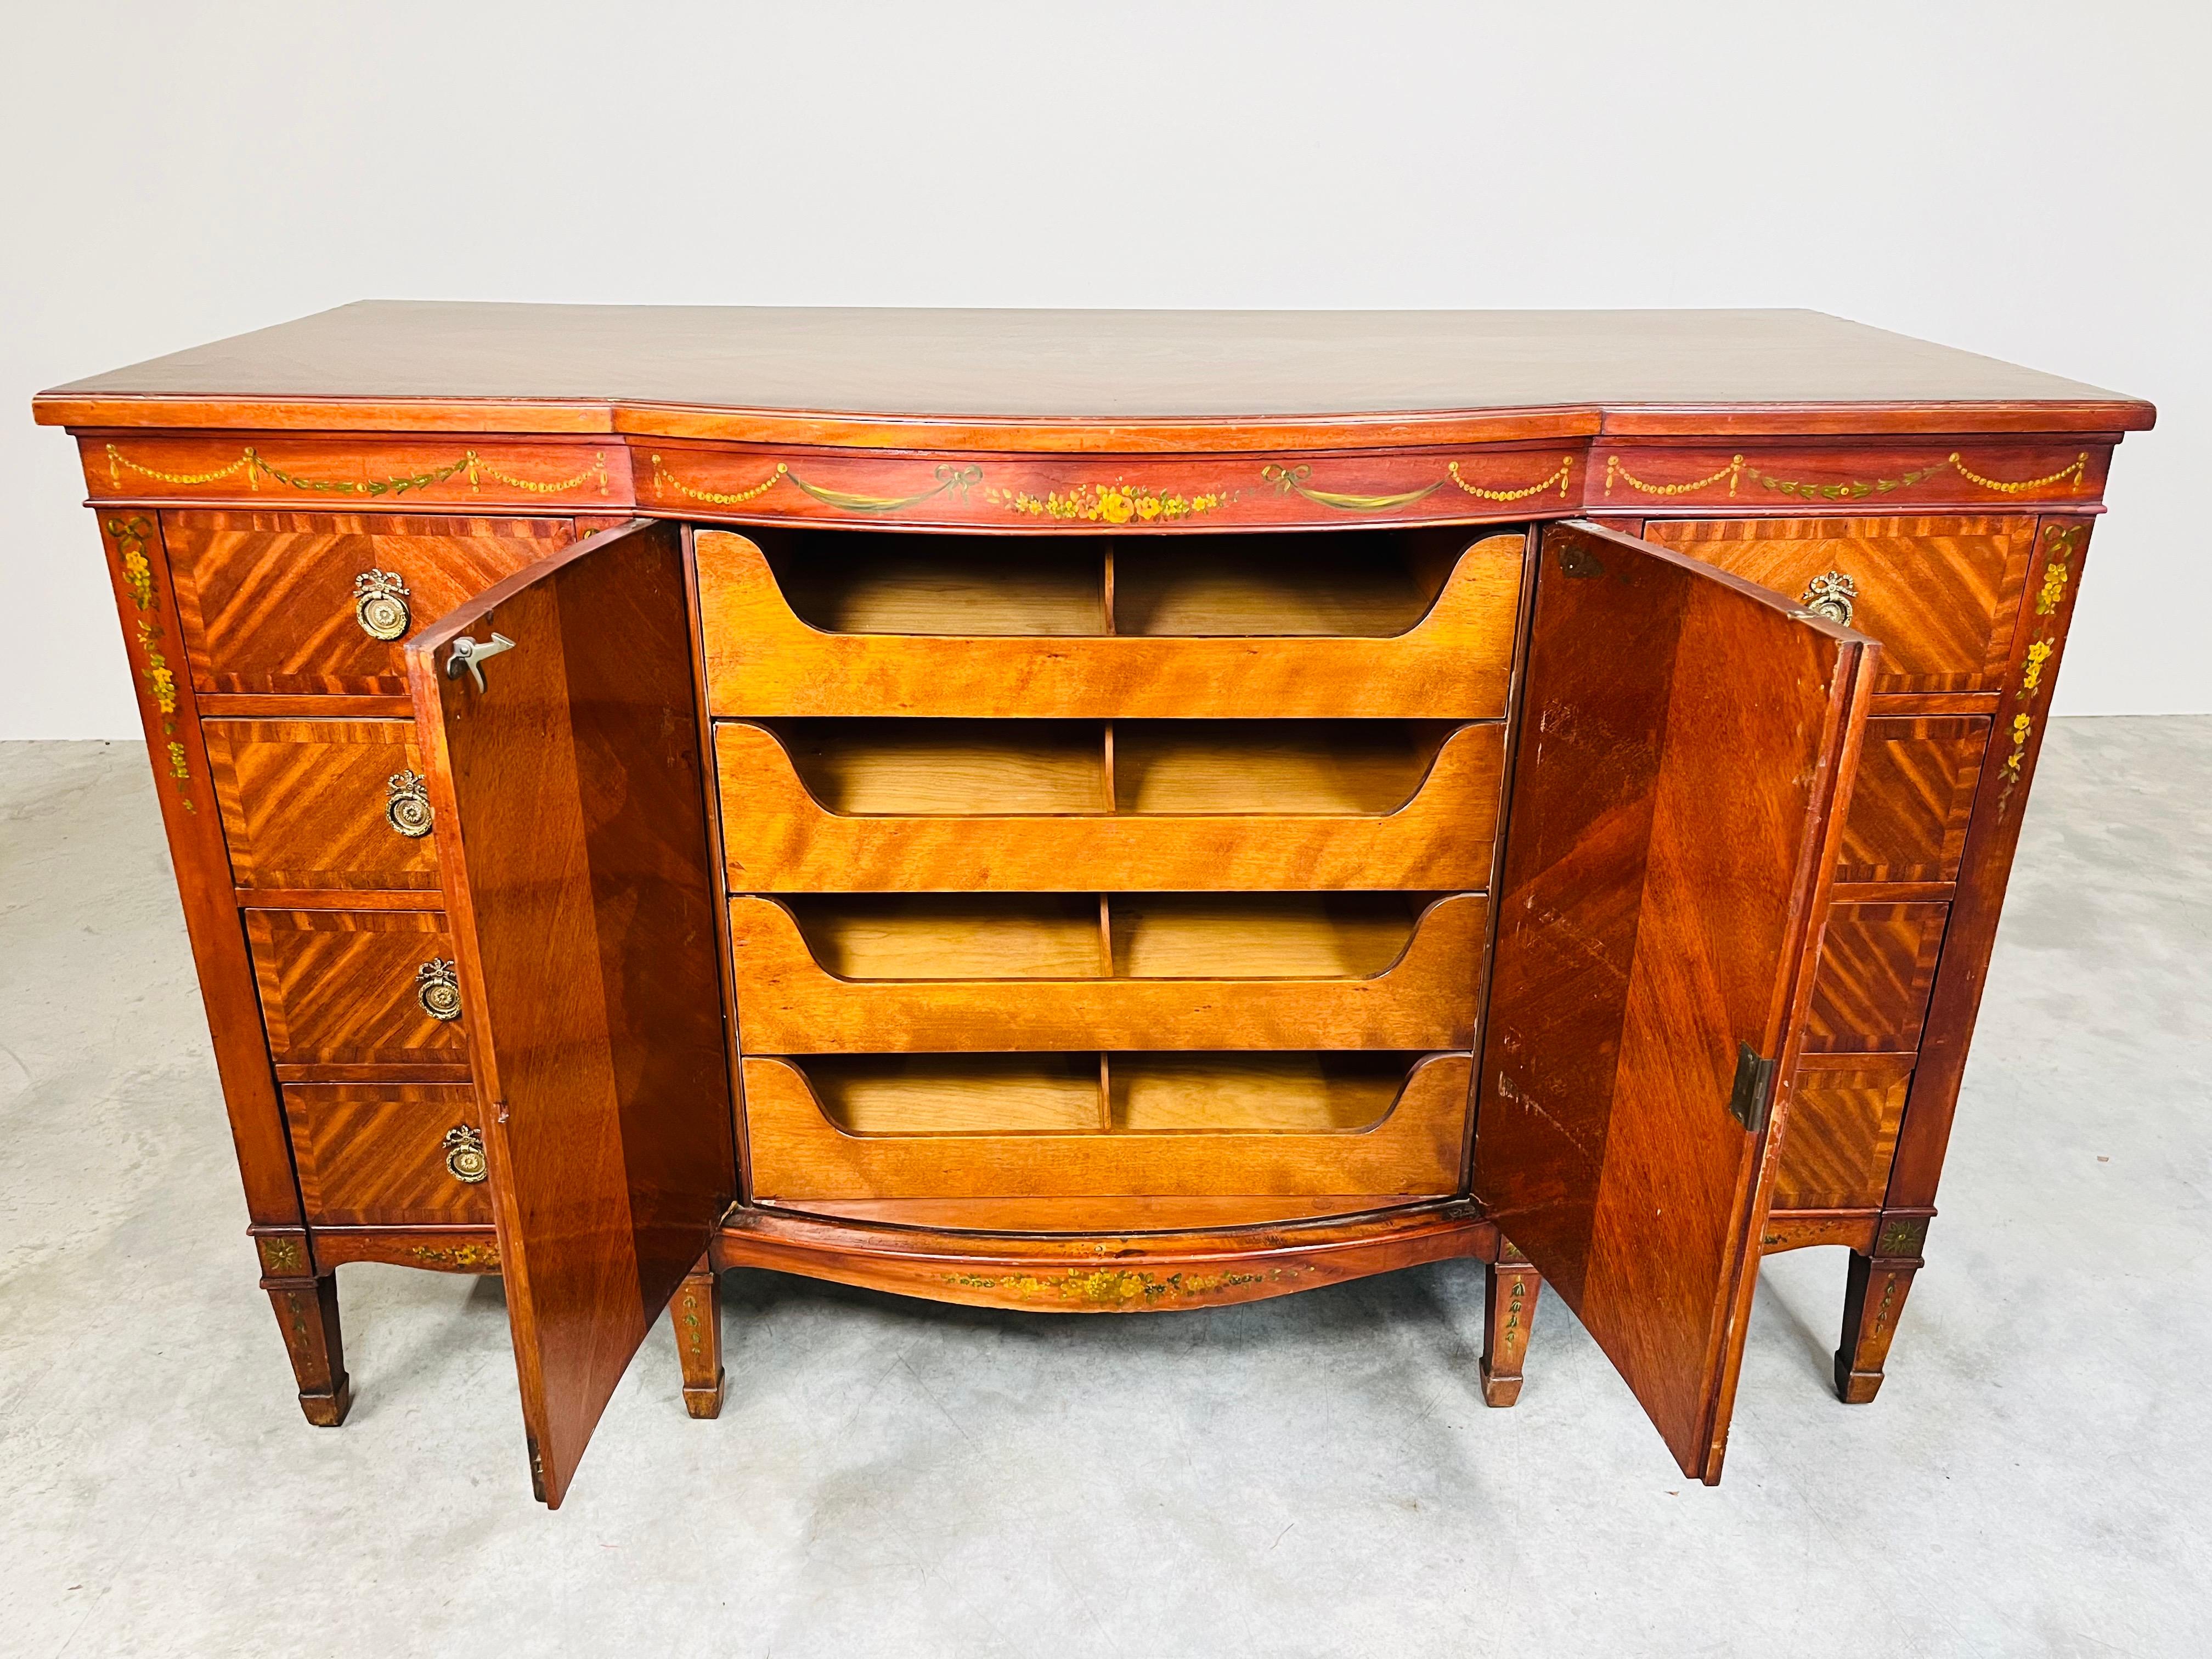 A fine hand painted satinwood veneer Sheraton Revival sideboard buffet having a frieze and bow front pair of doors painted in Adams style with neoclassical swags, paterae with scrolls and bellflower pendants, having 4 pull out interior drawers or